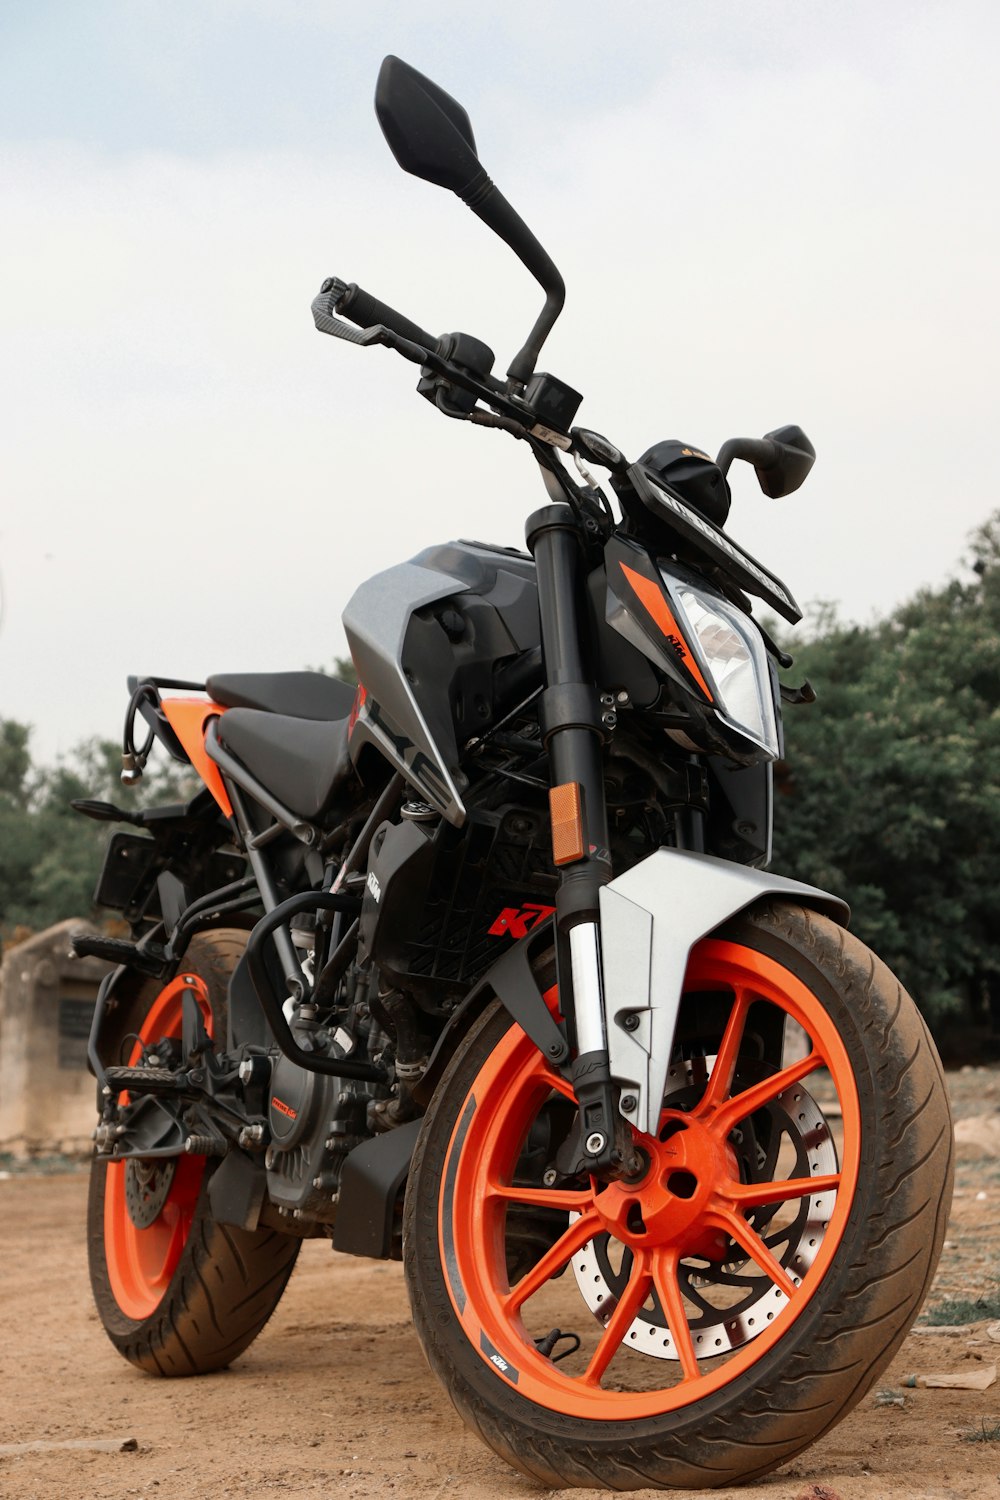 a black and orange motorcycle parked on a dirt road